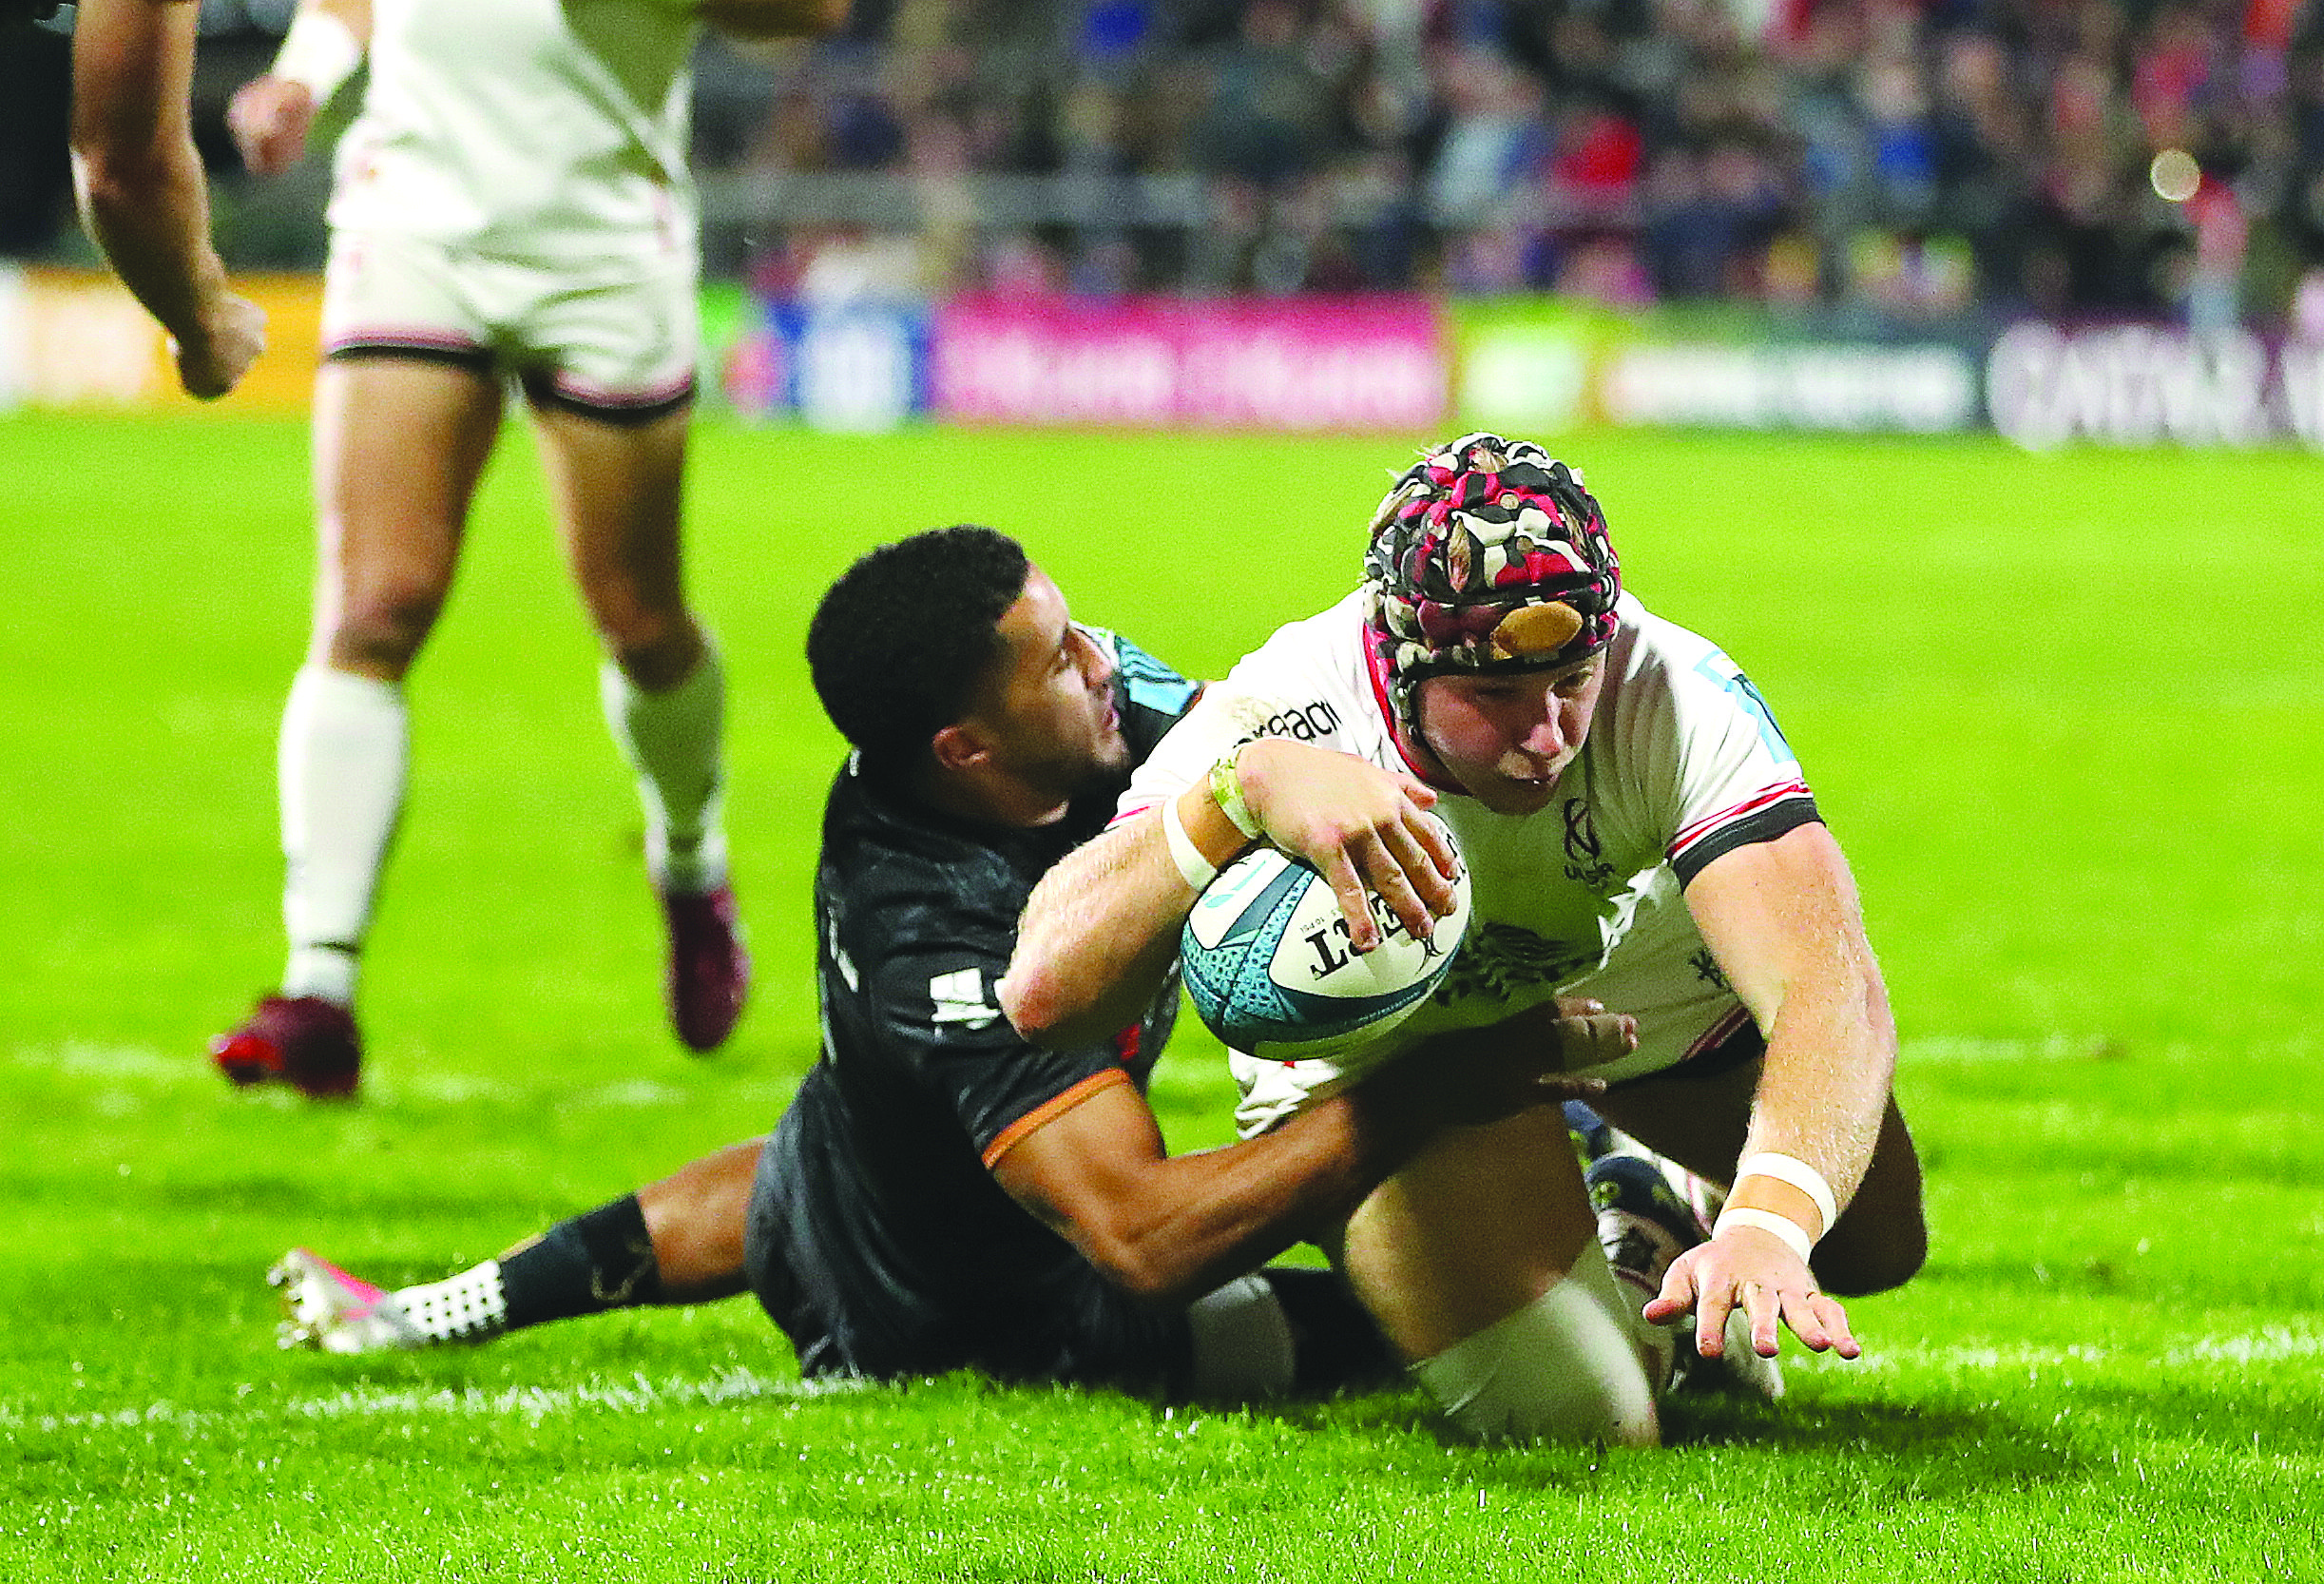 Luke Marshall claimed the man-of-the-match award in last weekend’s victory over Ospreys and insists Ulster must learn the lessons of last season’s reverses in South Africa to fare better in the Southern Hemisphere over the next two weekends